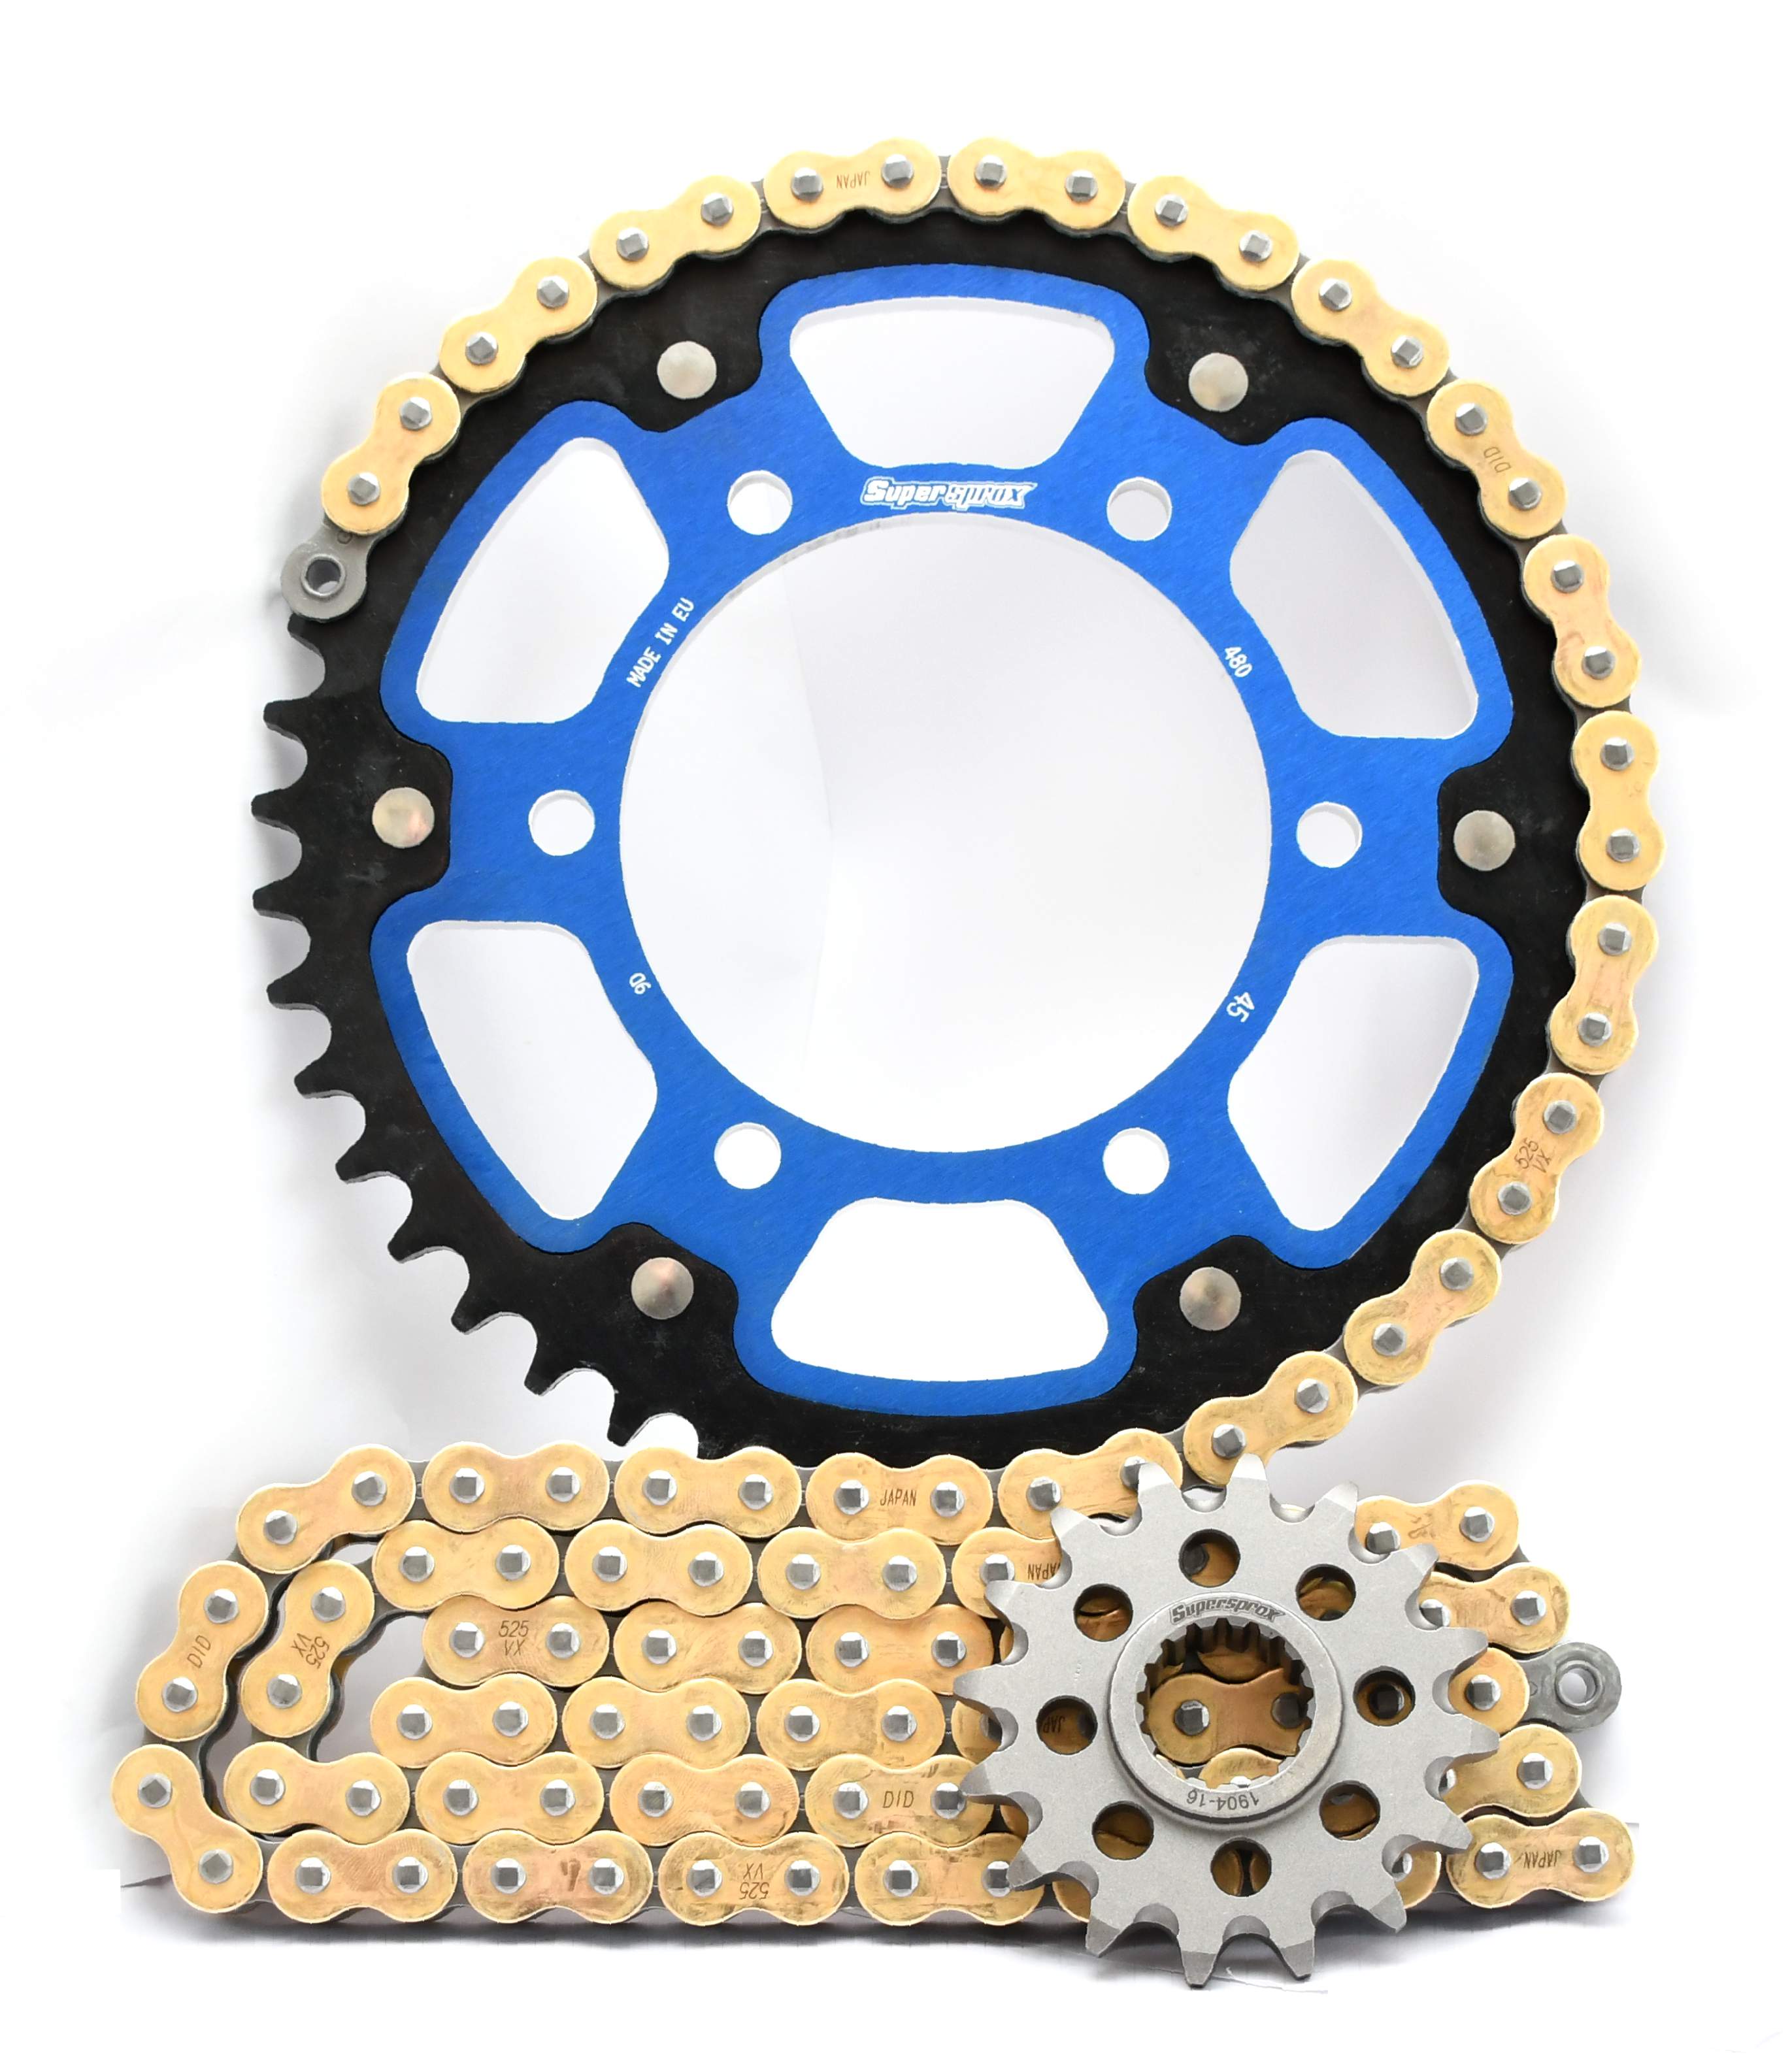 Supersprox Chain and Sprocket Kit - BMW S1000XR 2015-2019 - Standard Gearing